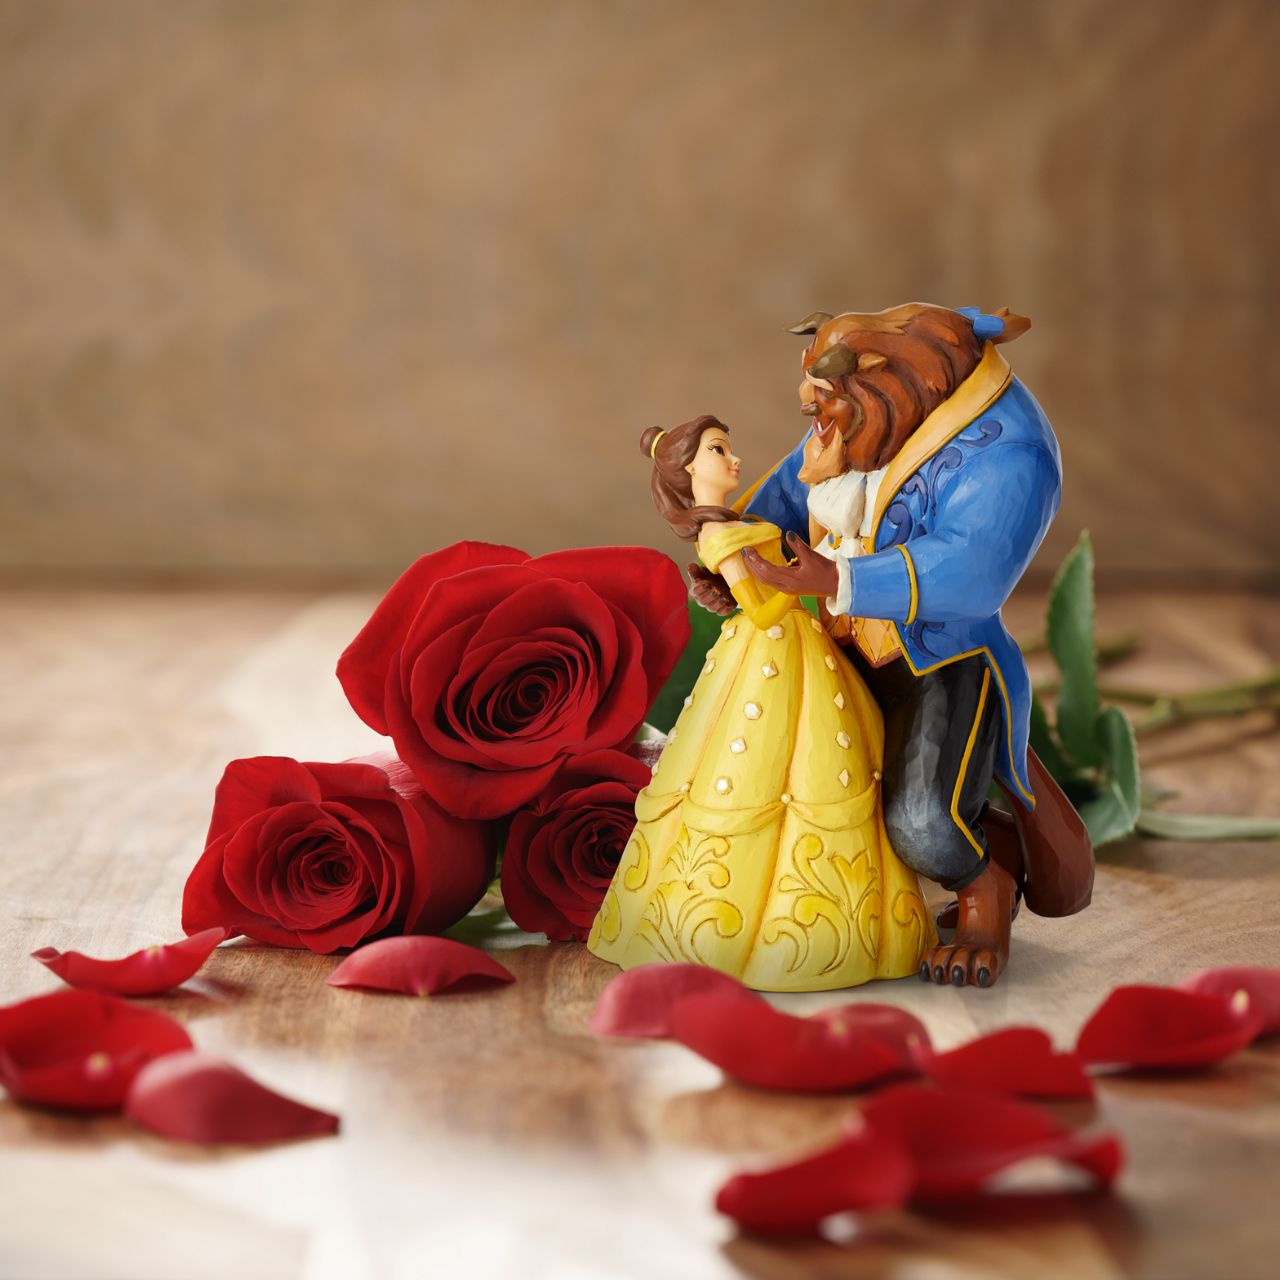 Jim Shore celebrates the 25th anniversary of the Disney classic film Beauty and The Beast with this enchanting double figurine inspired by the romantic ballroom scene when Belle and her suitor discover their love is a tale as old as time.